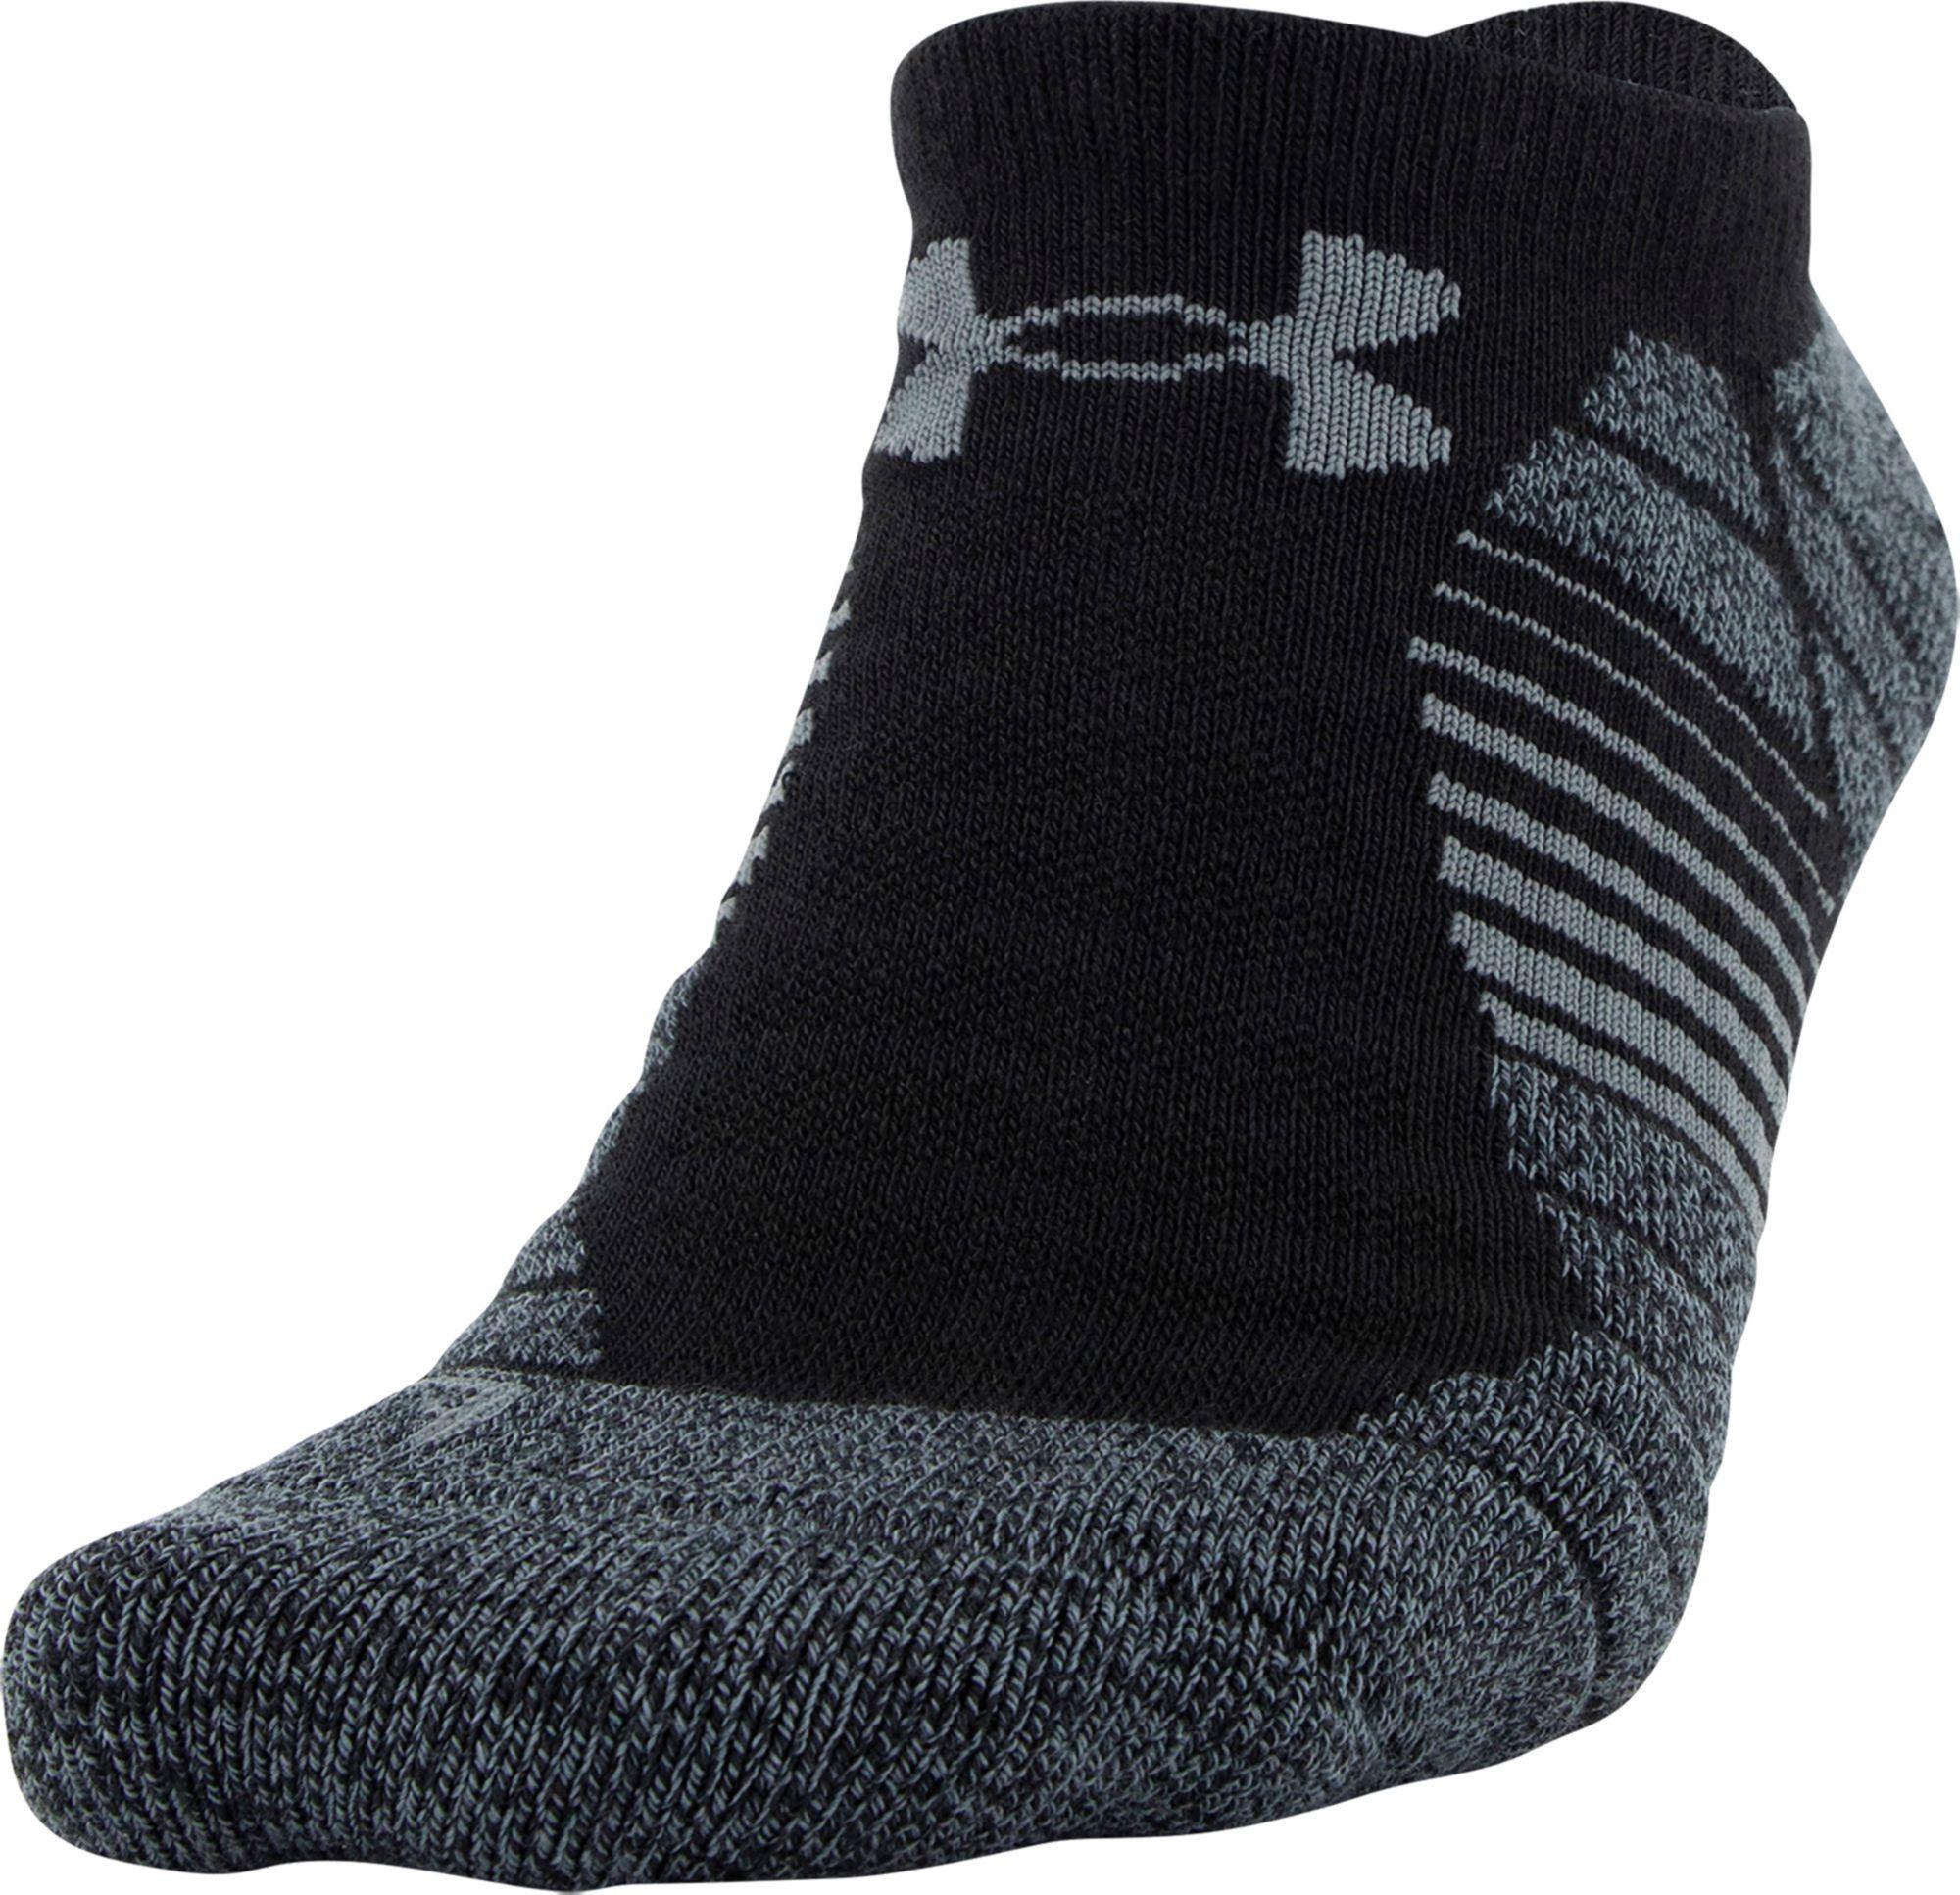 Under Armour Elevated Performance No Show Socks - 3 Pack - Lyst